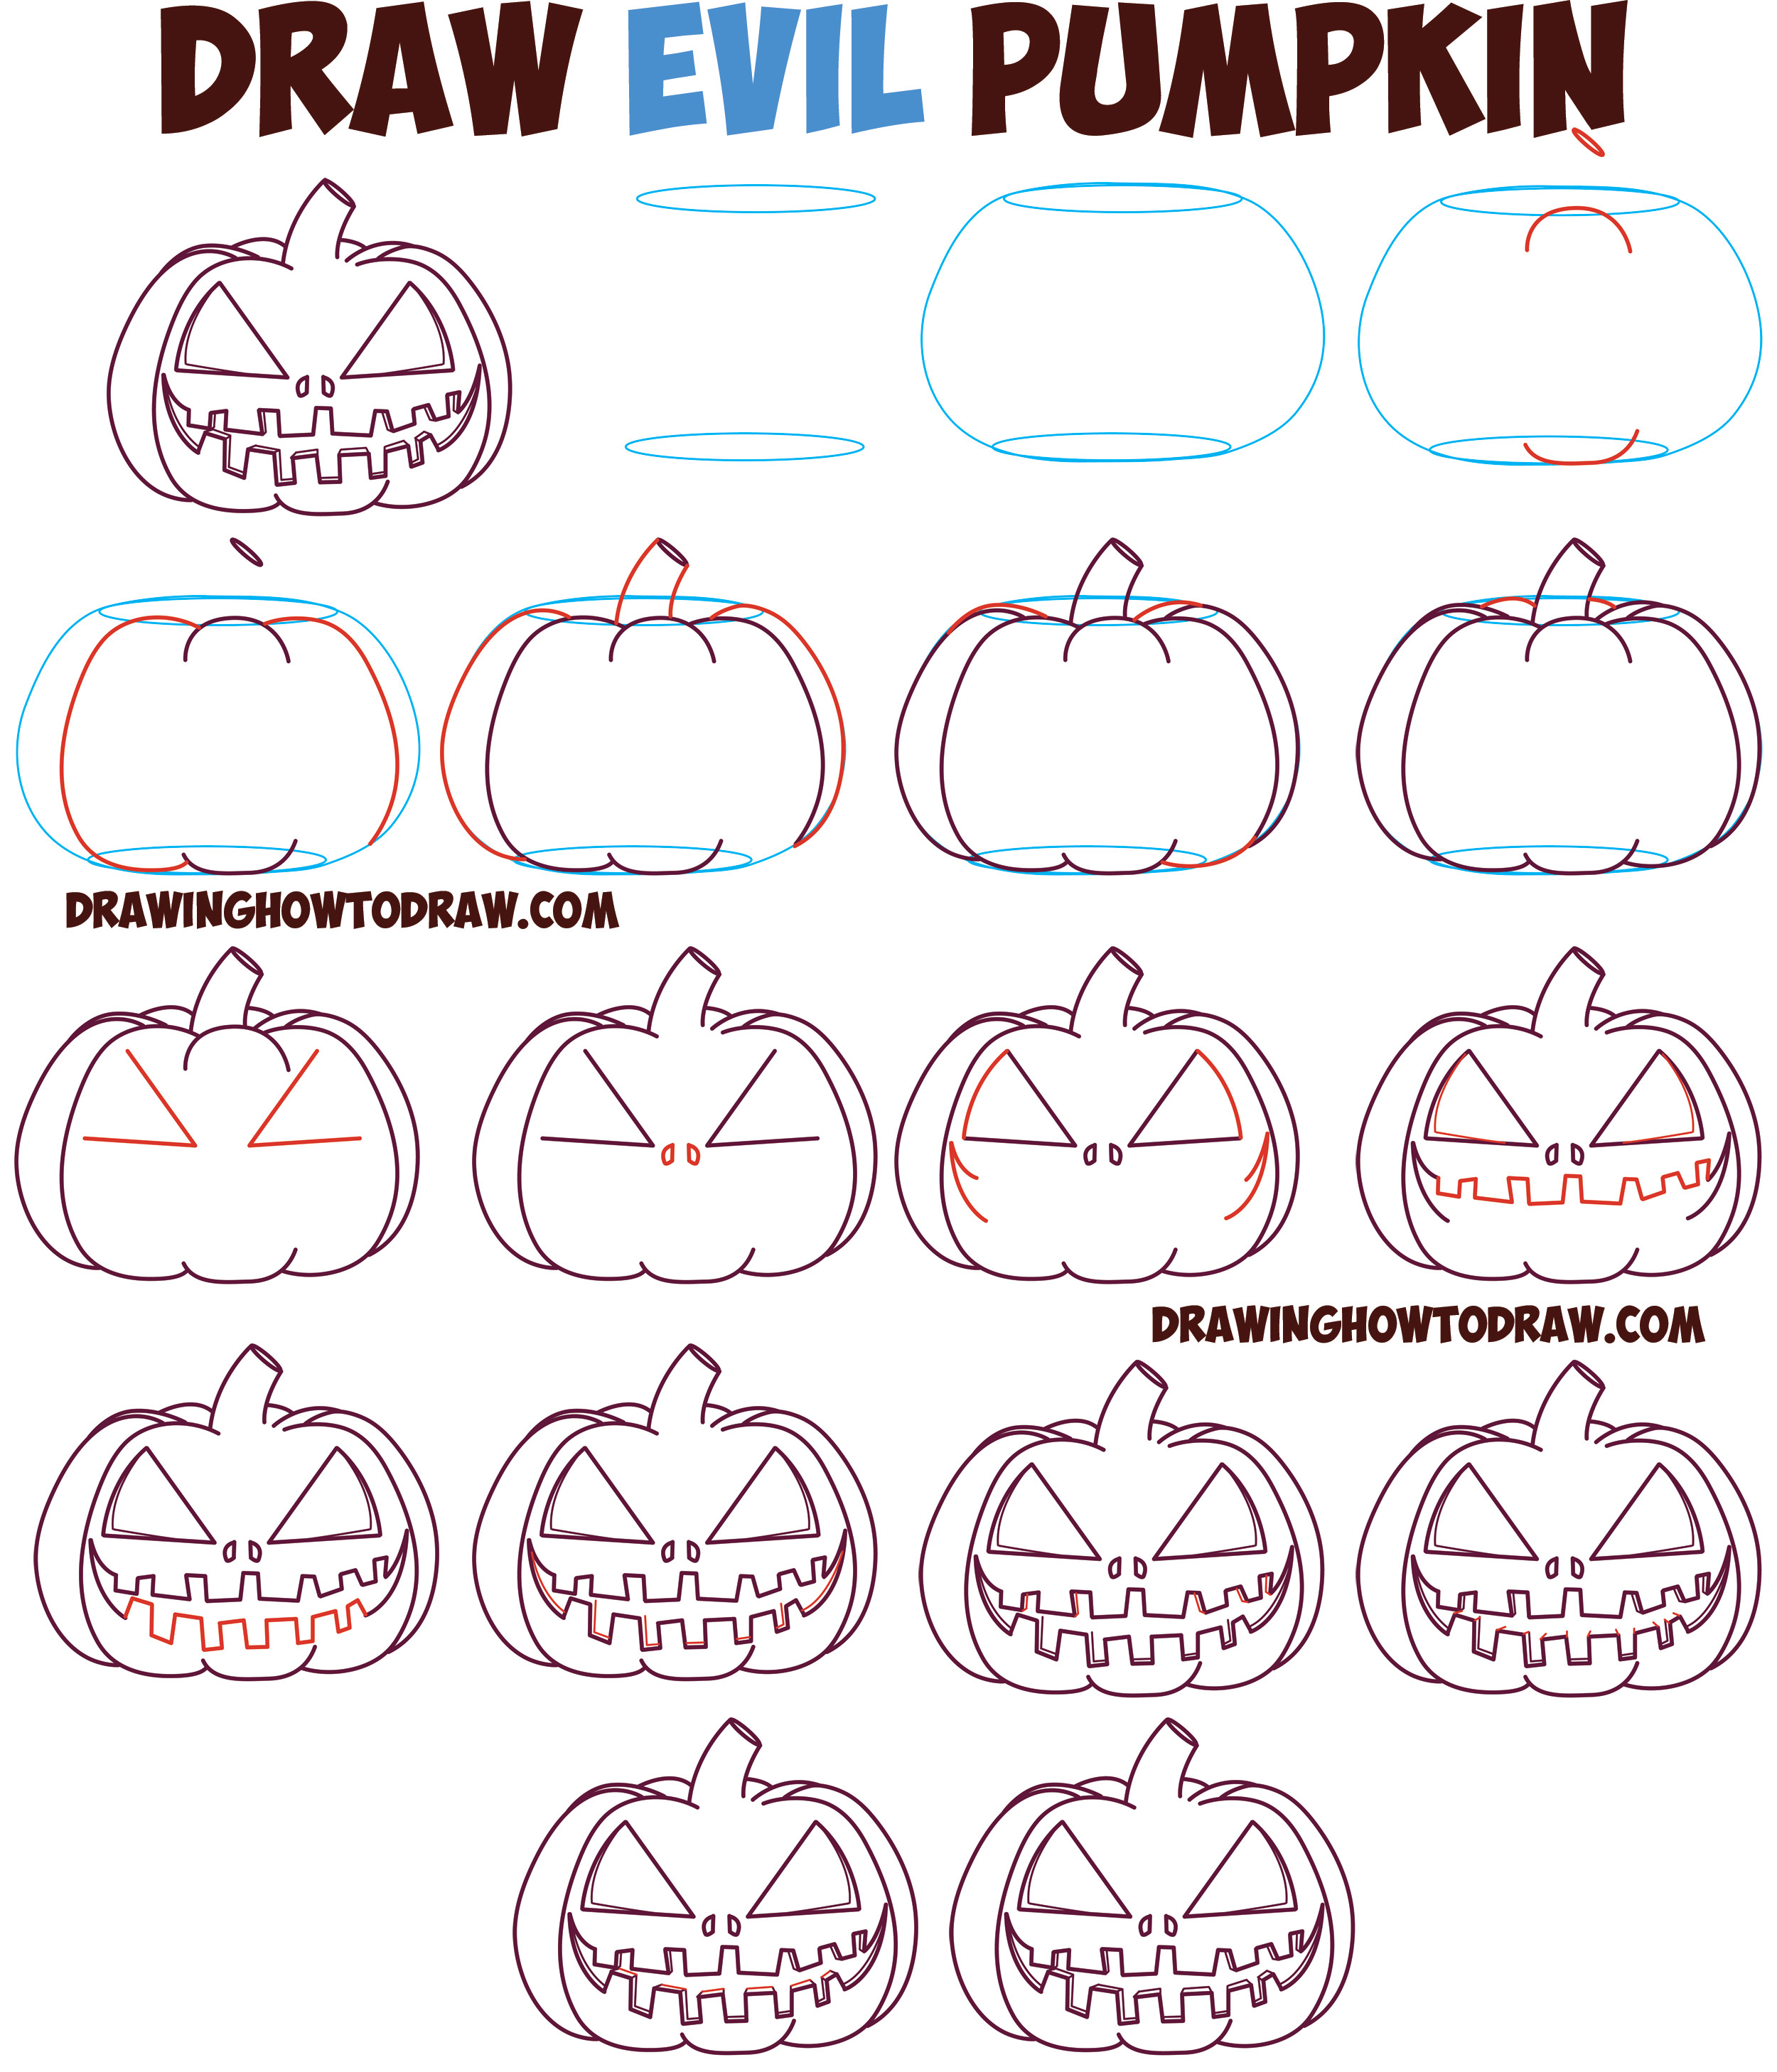 Drawing Ideas for Pumpkins Huge Guide to Drawing Cartoon Pumpkin Faces Jack O Lantern Faces